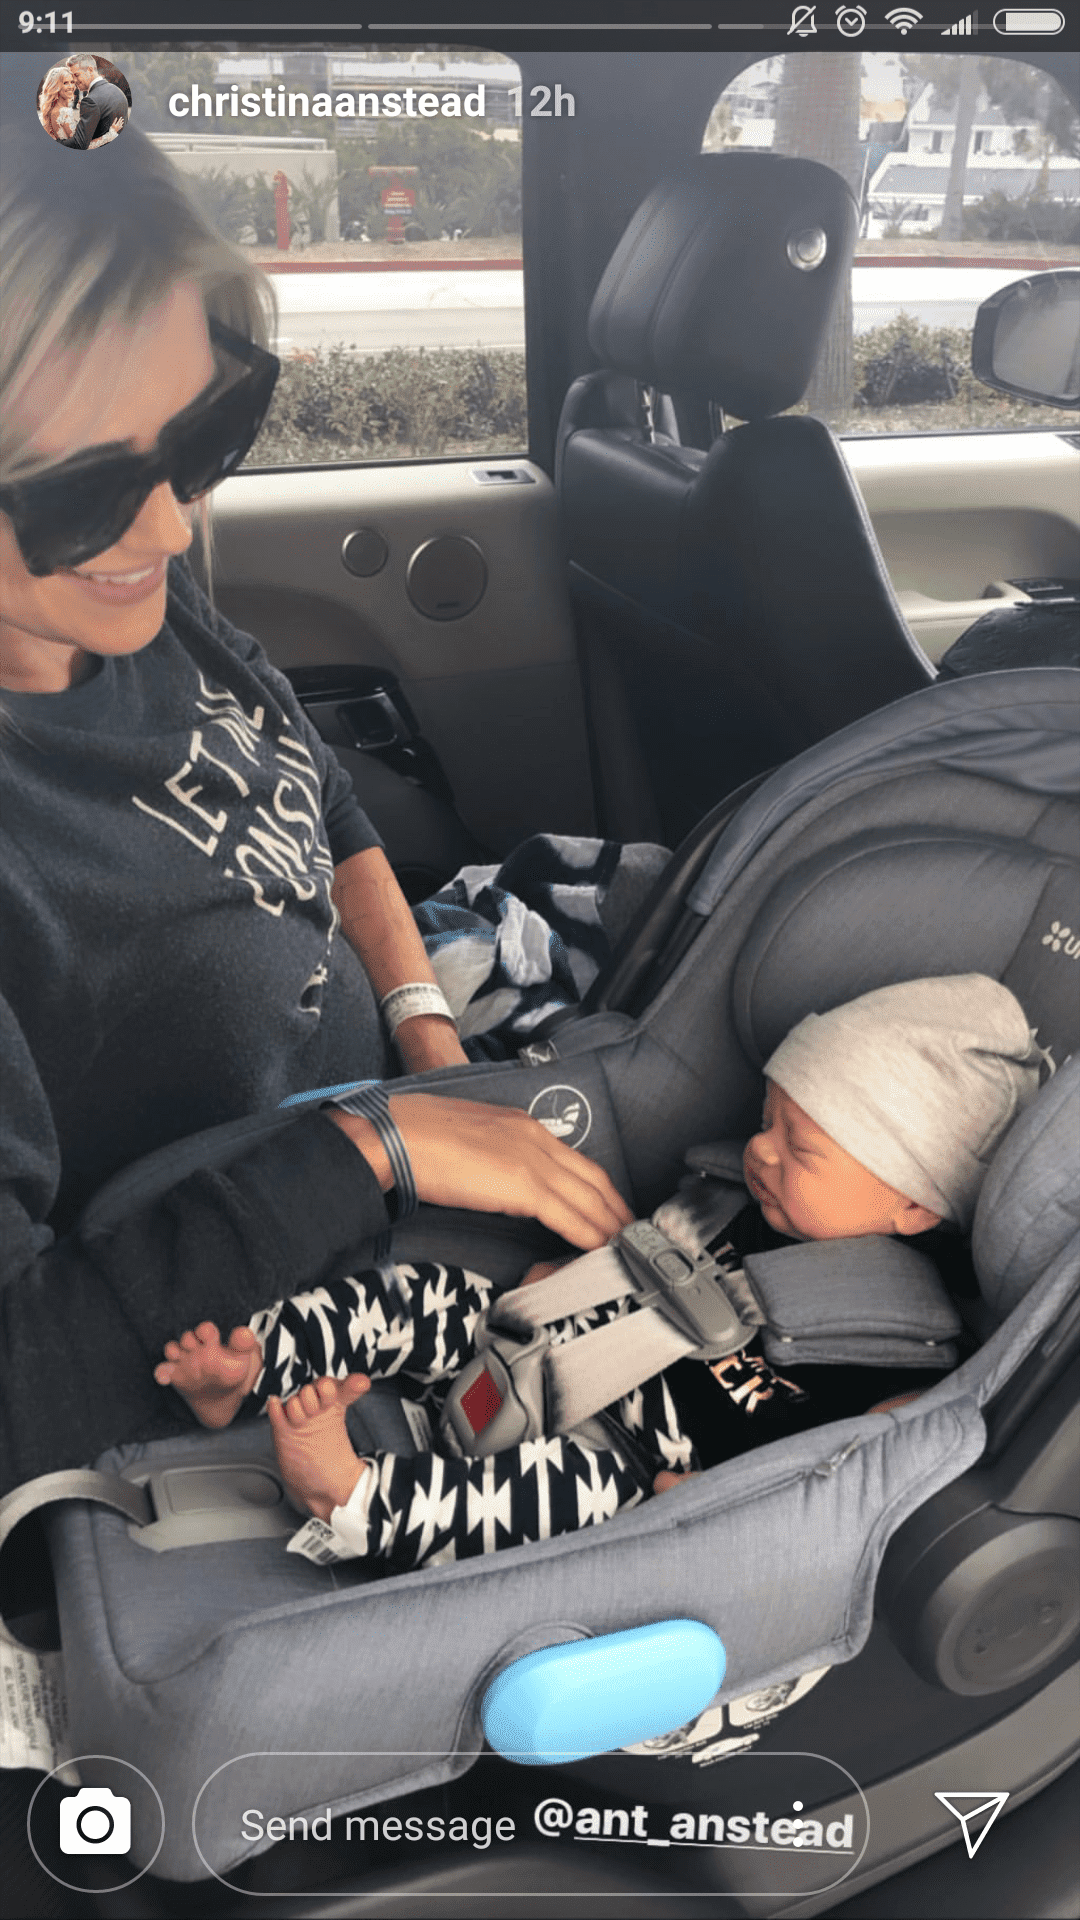 Christina Anstead on her way home from the hospital after giving birth to her baby boy, Hudson | Photo: instagram.com/christiananstead